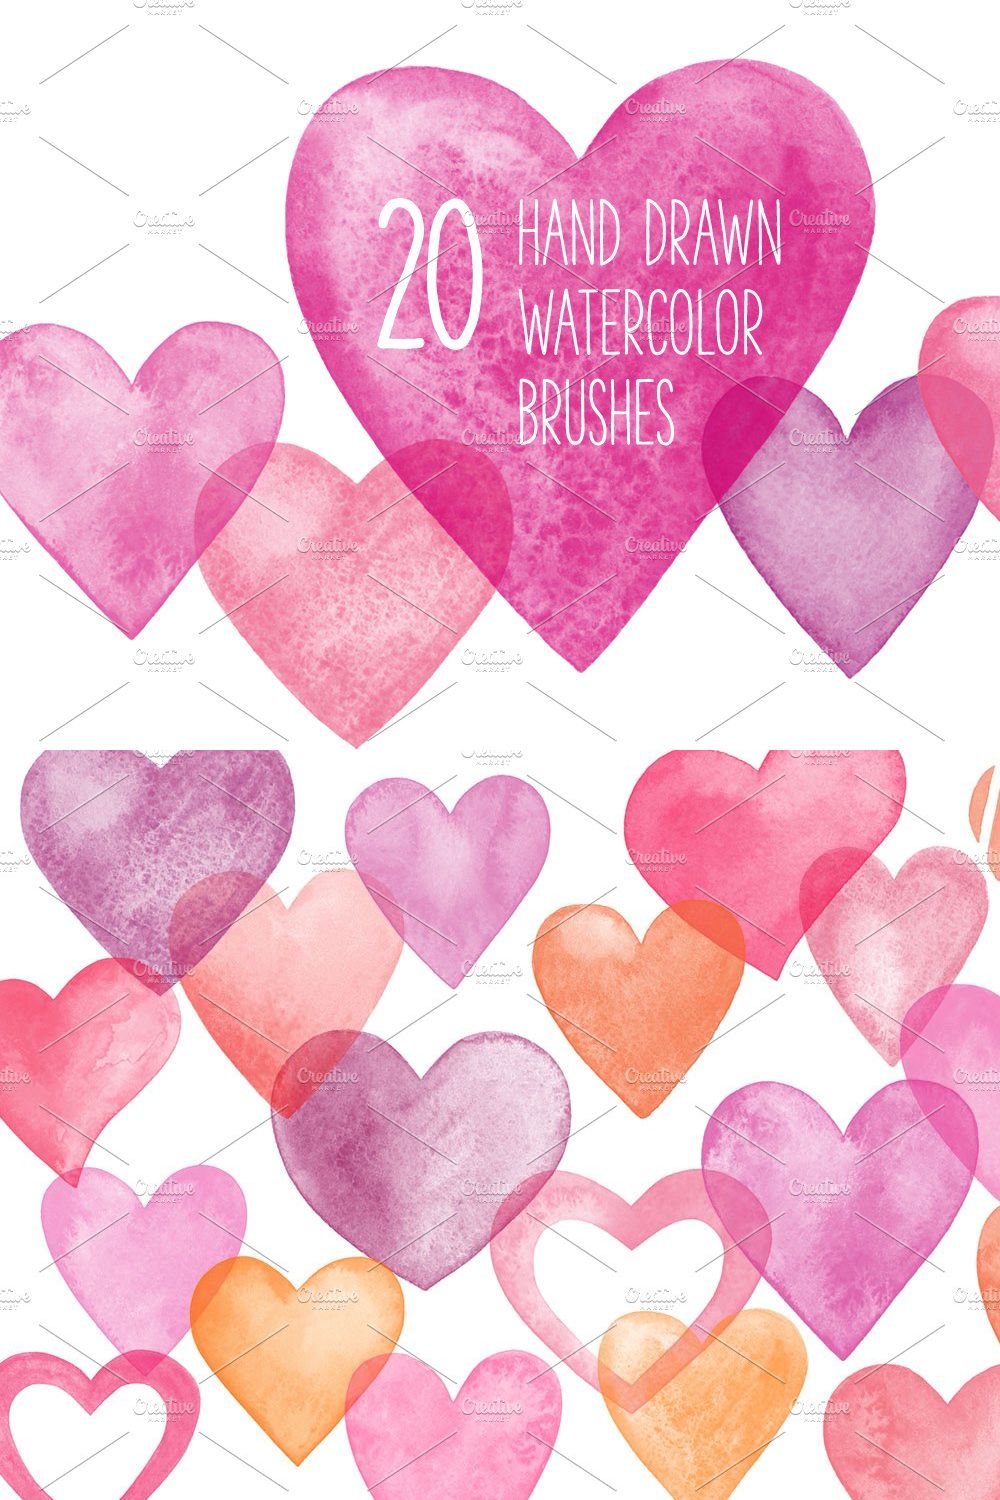 Watercolor hearts brushes pinterest preview image.